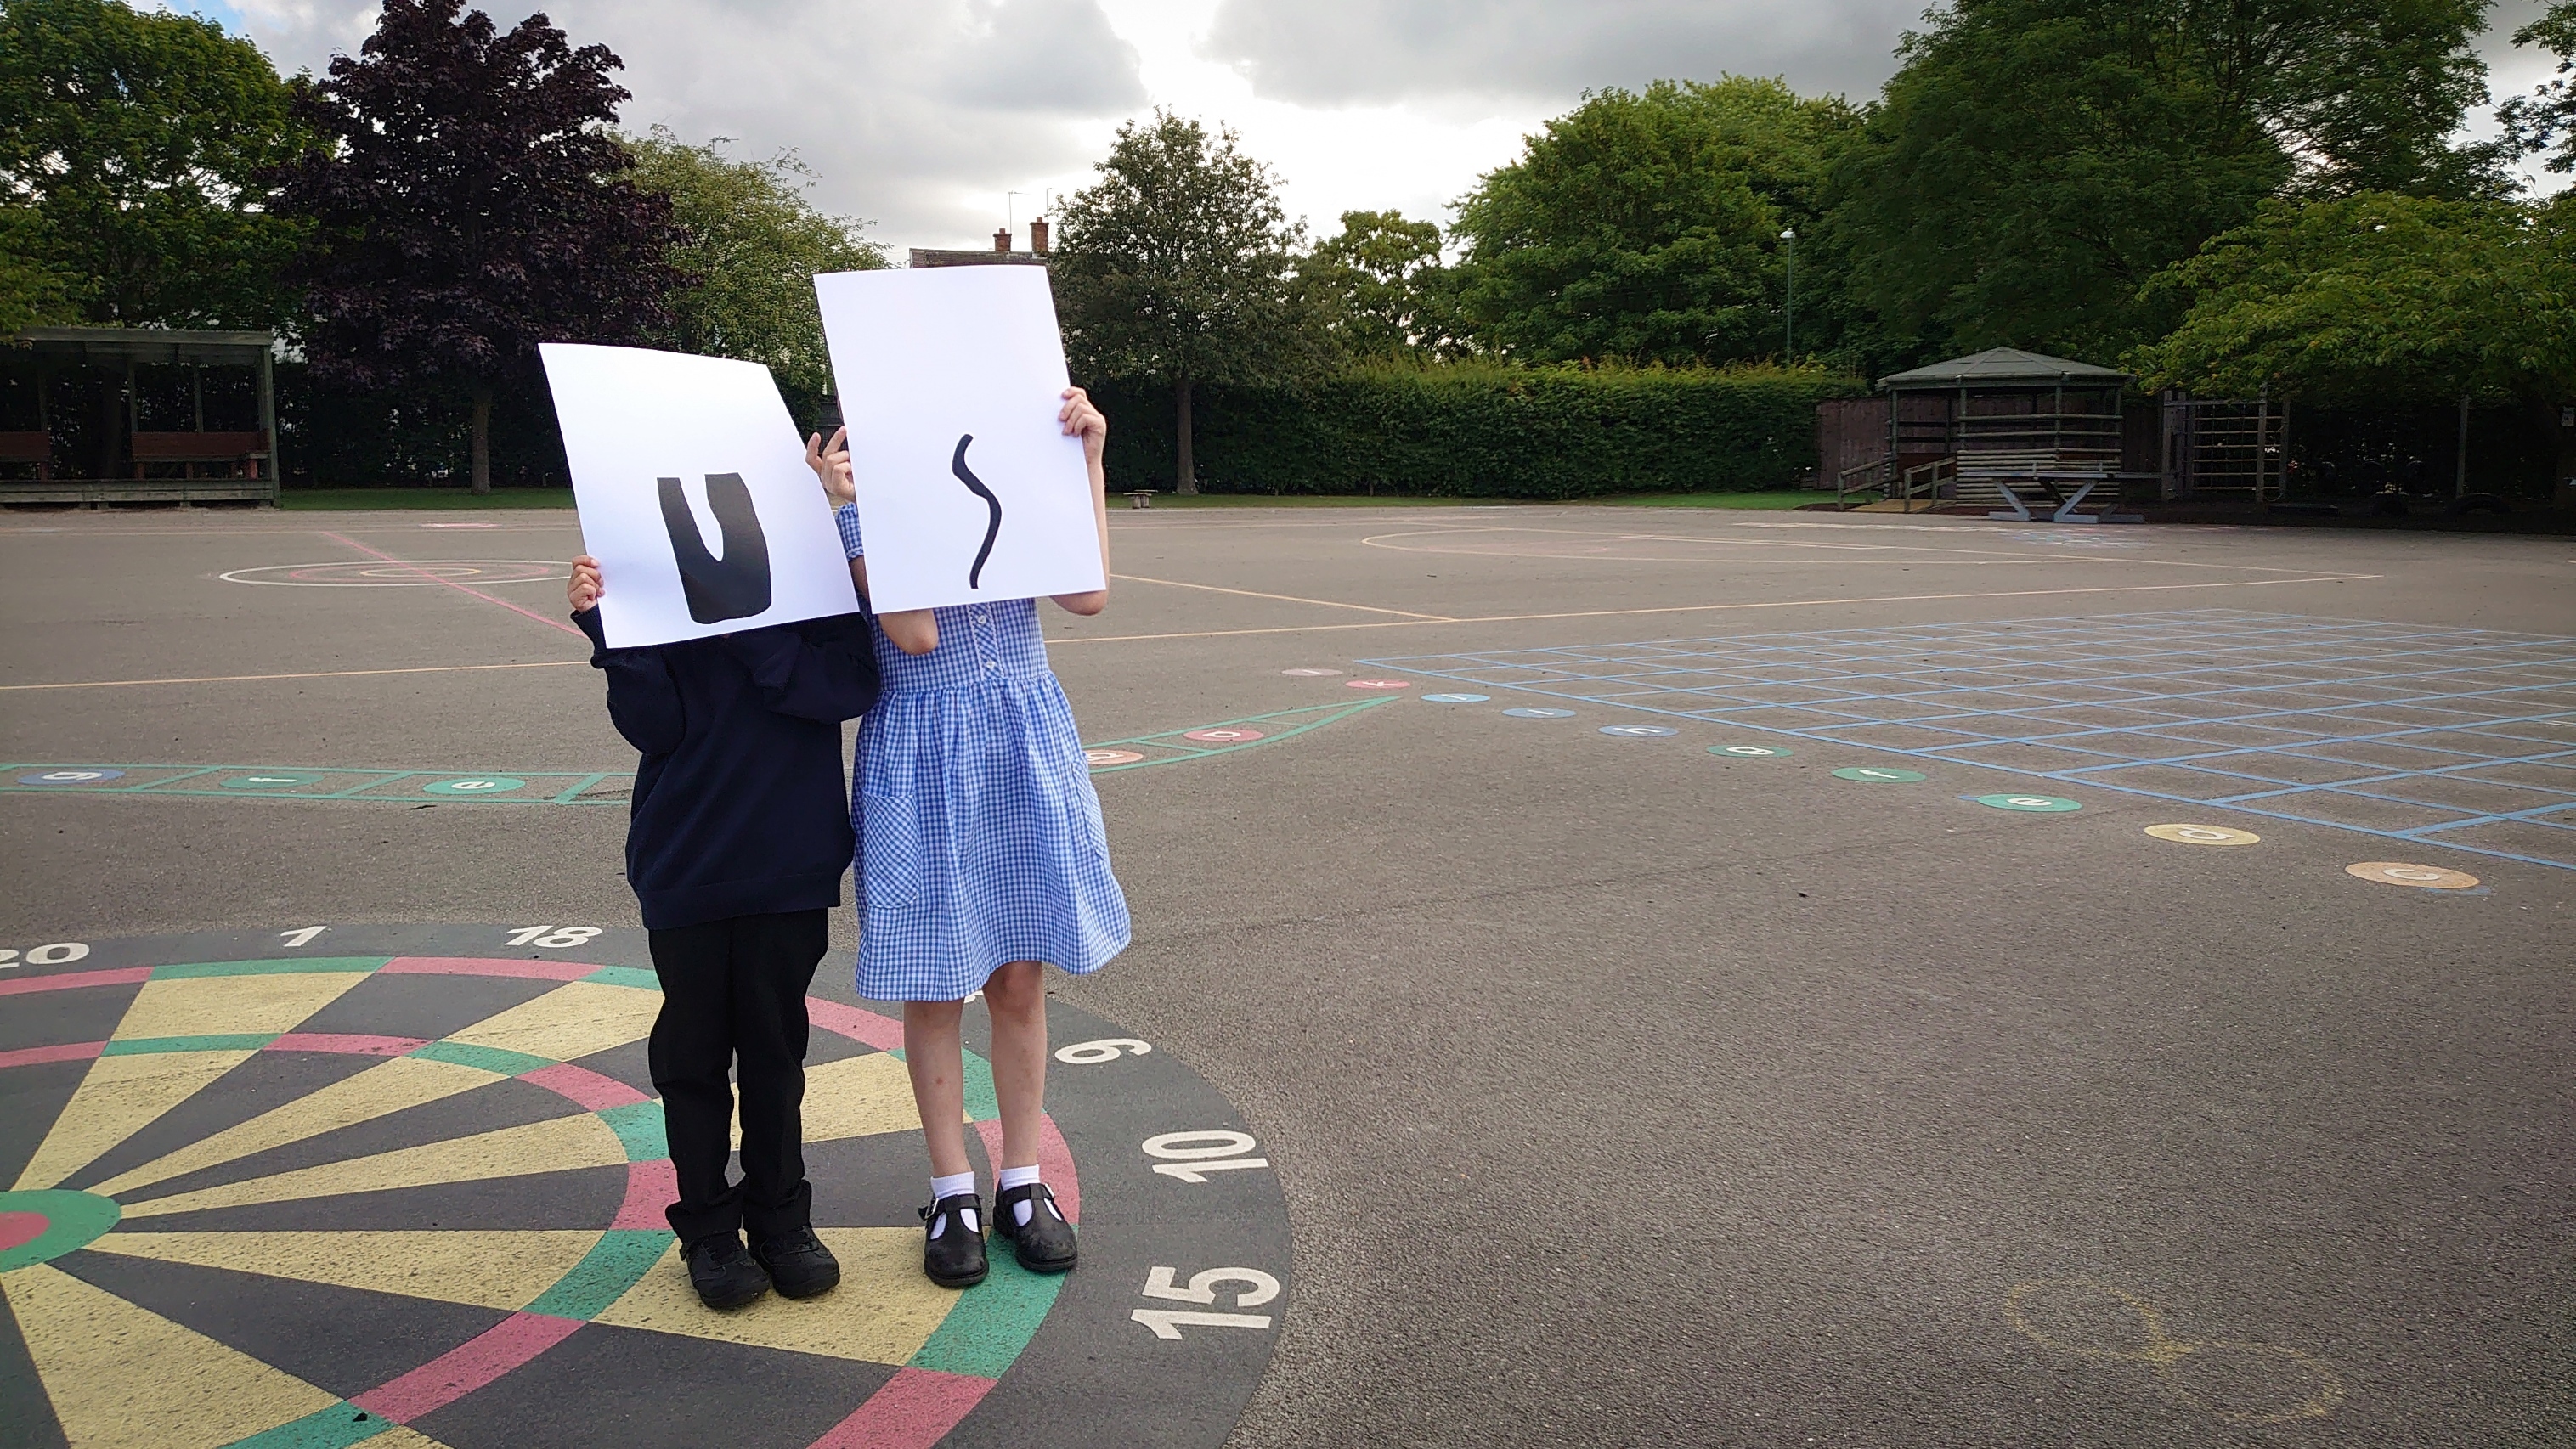 Two primary school children are stood in a school playground holding sheets of paper in front of their faces which have a single letter printed (U and S) on each sheet